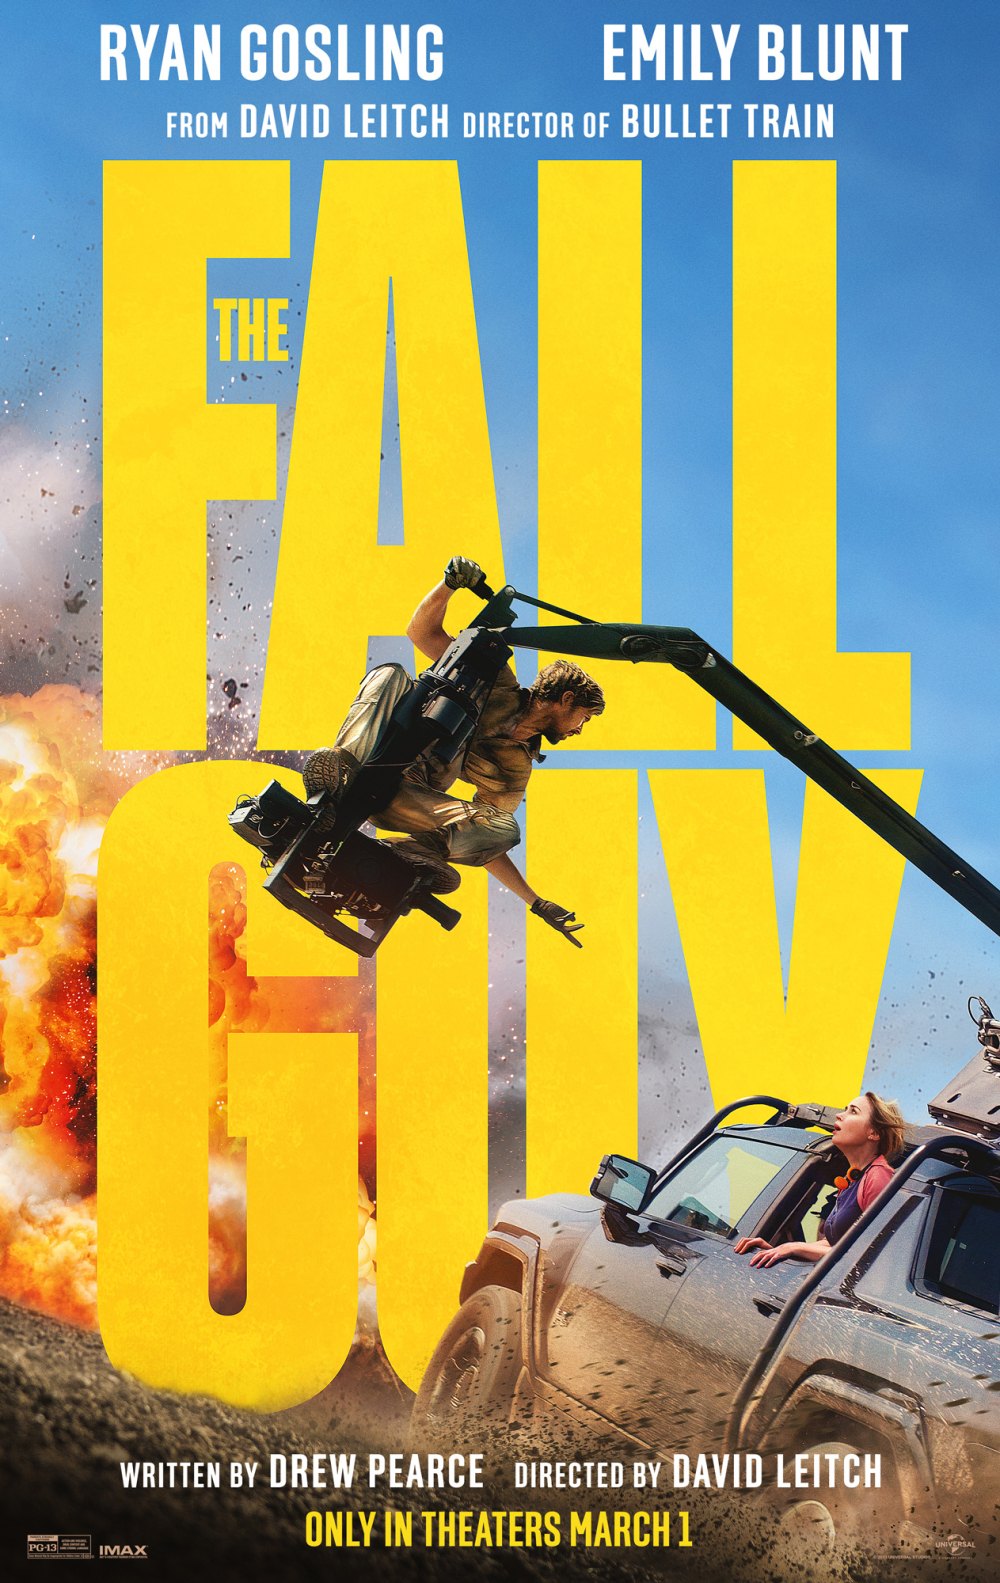 The Fall Guy Stunt Designer Chris OHara Confirms Ryan Gosling Is Just as Great as You Think He Is